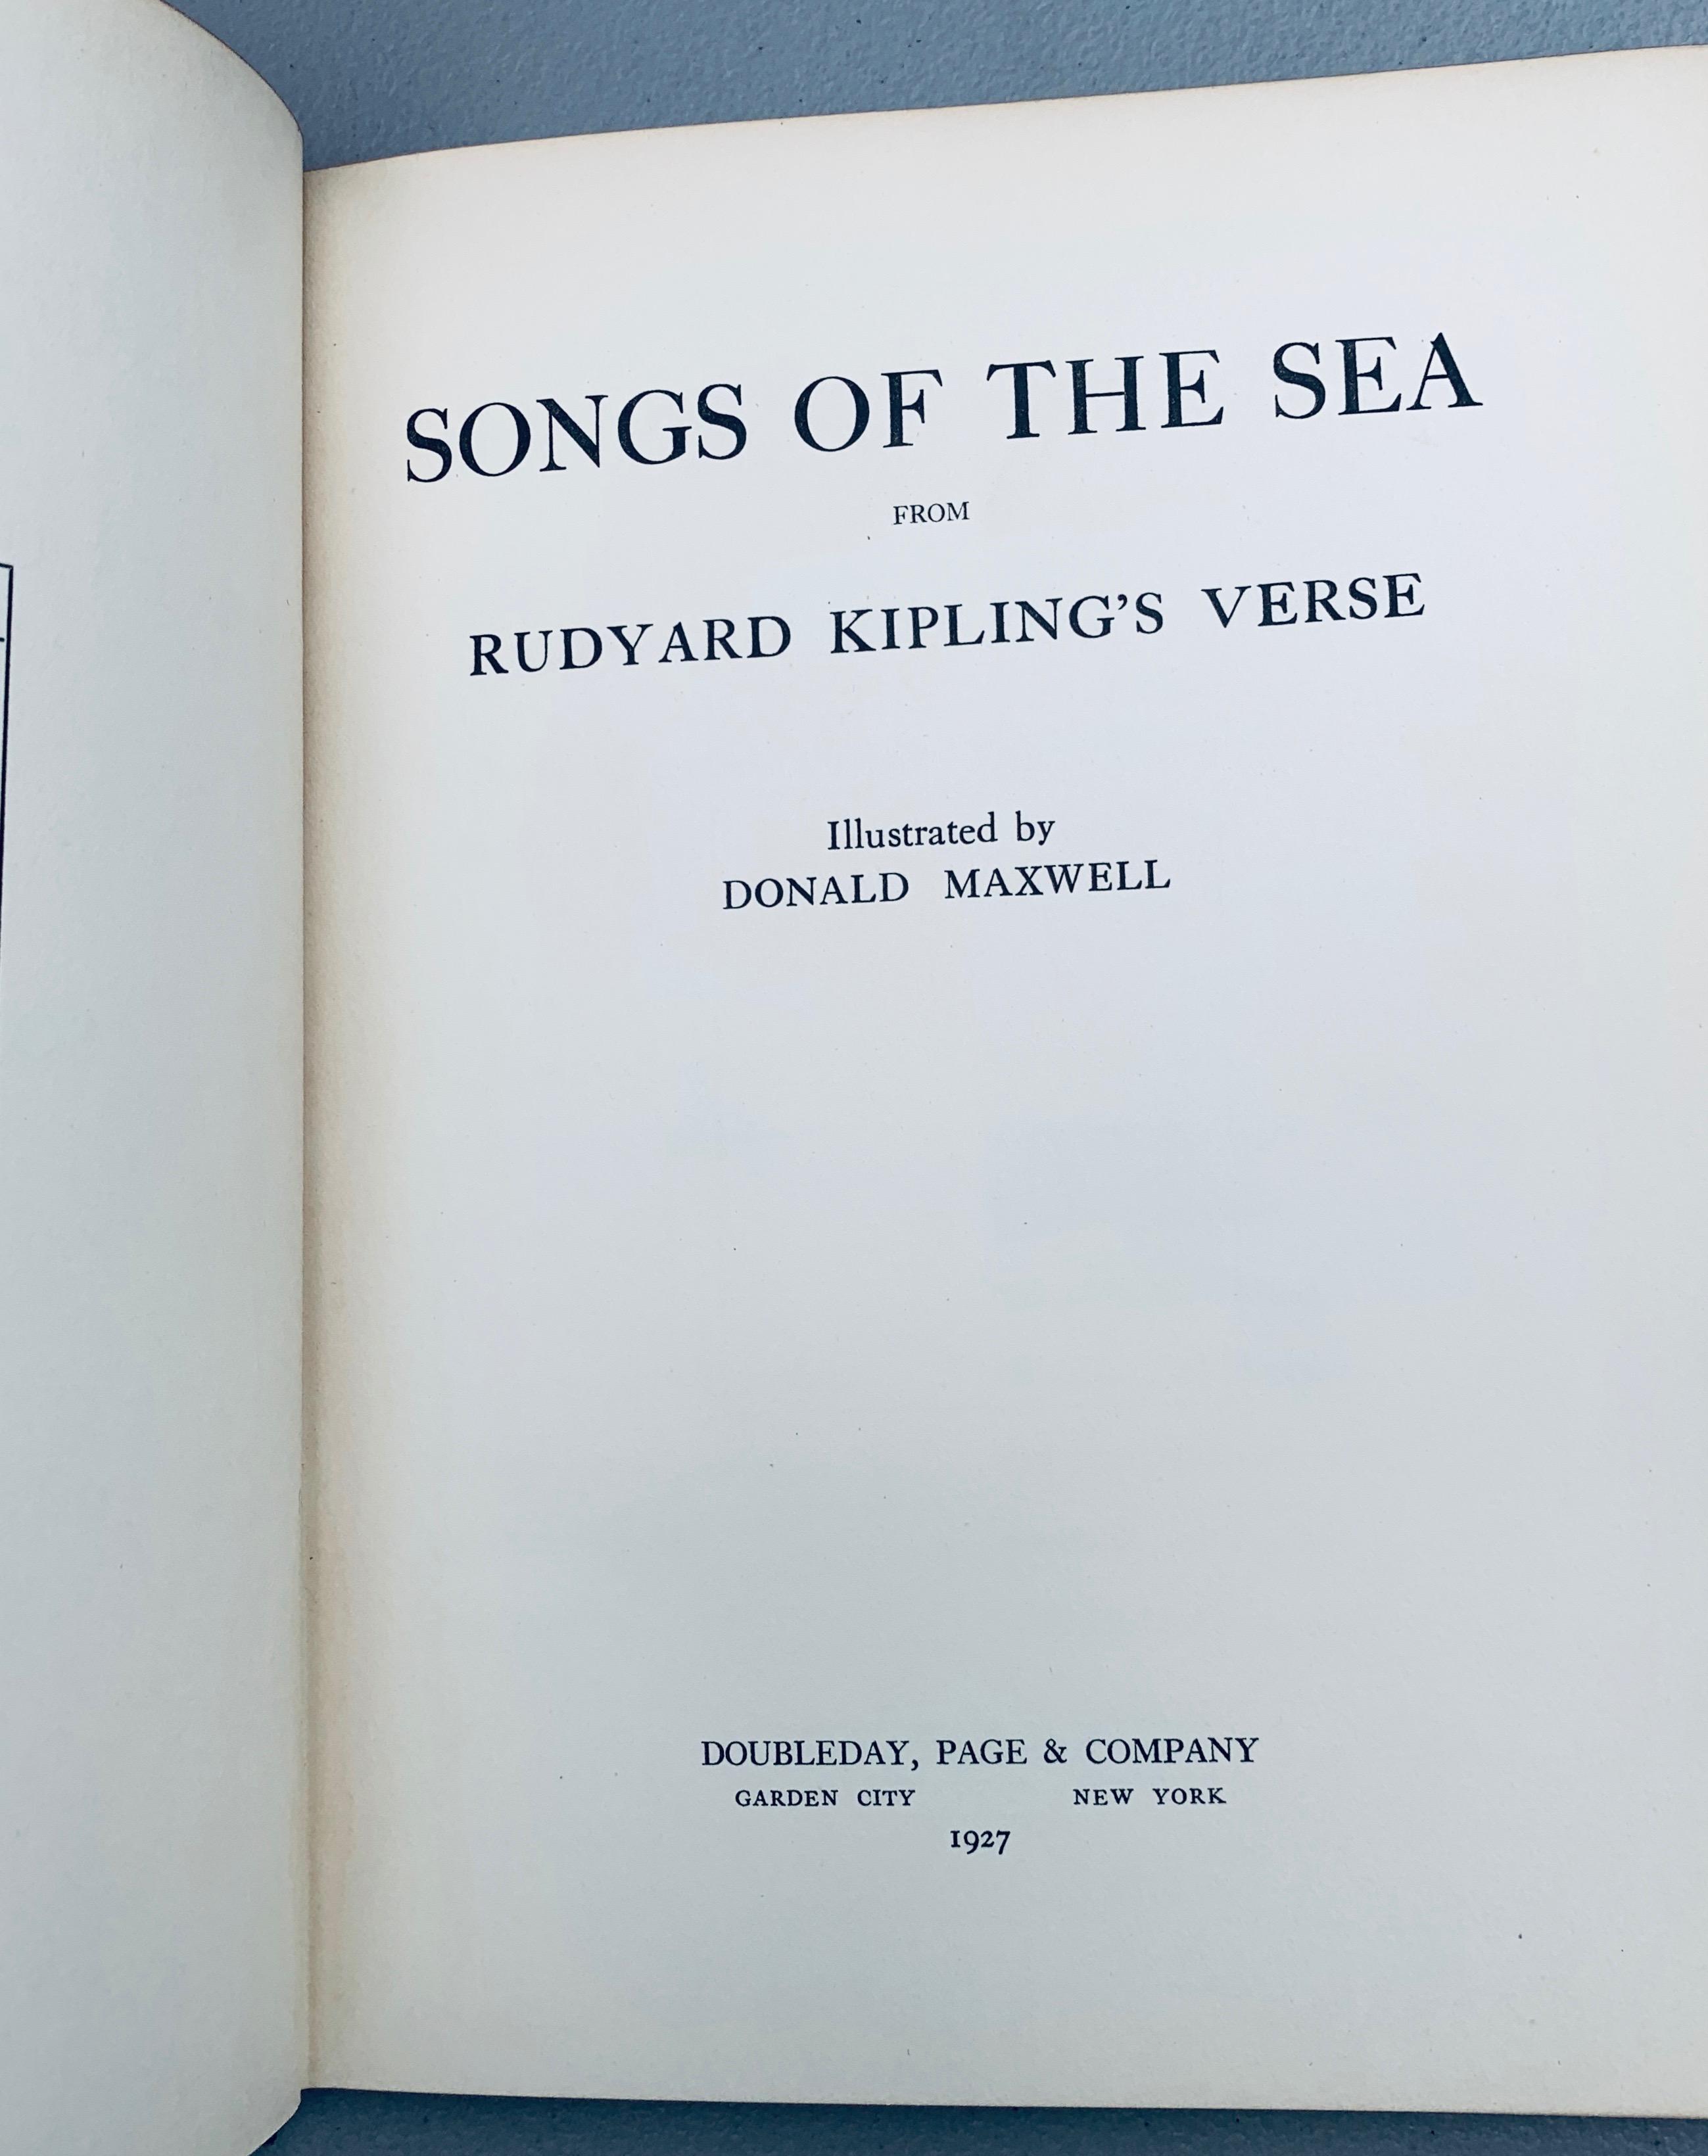 Songs Of The Sea From Rudyard Kiplings Verse by Donald Maxwell (1927) with Color Illustrations